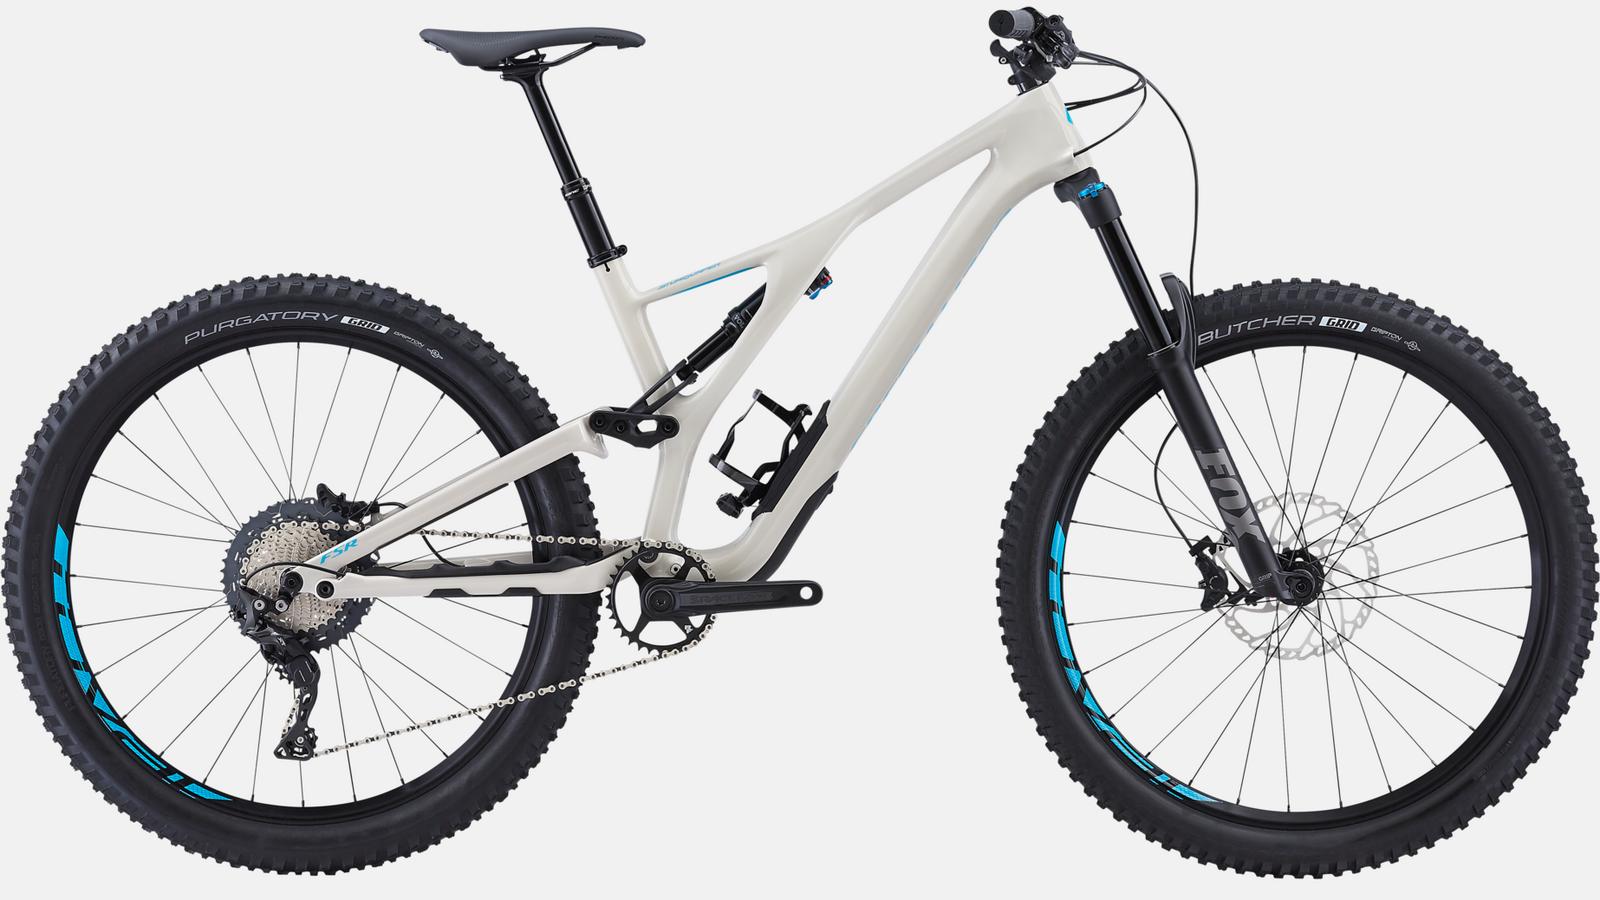 Paint for 2018 Specialized Men's Stumpjumper Comp Carbon 27.5 - Gloss White Mountains